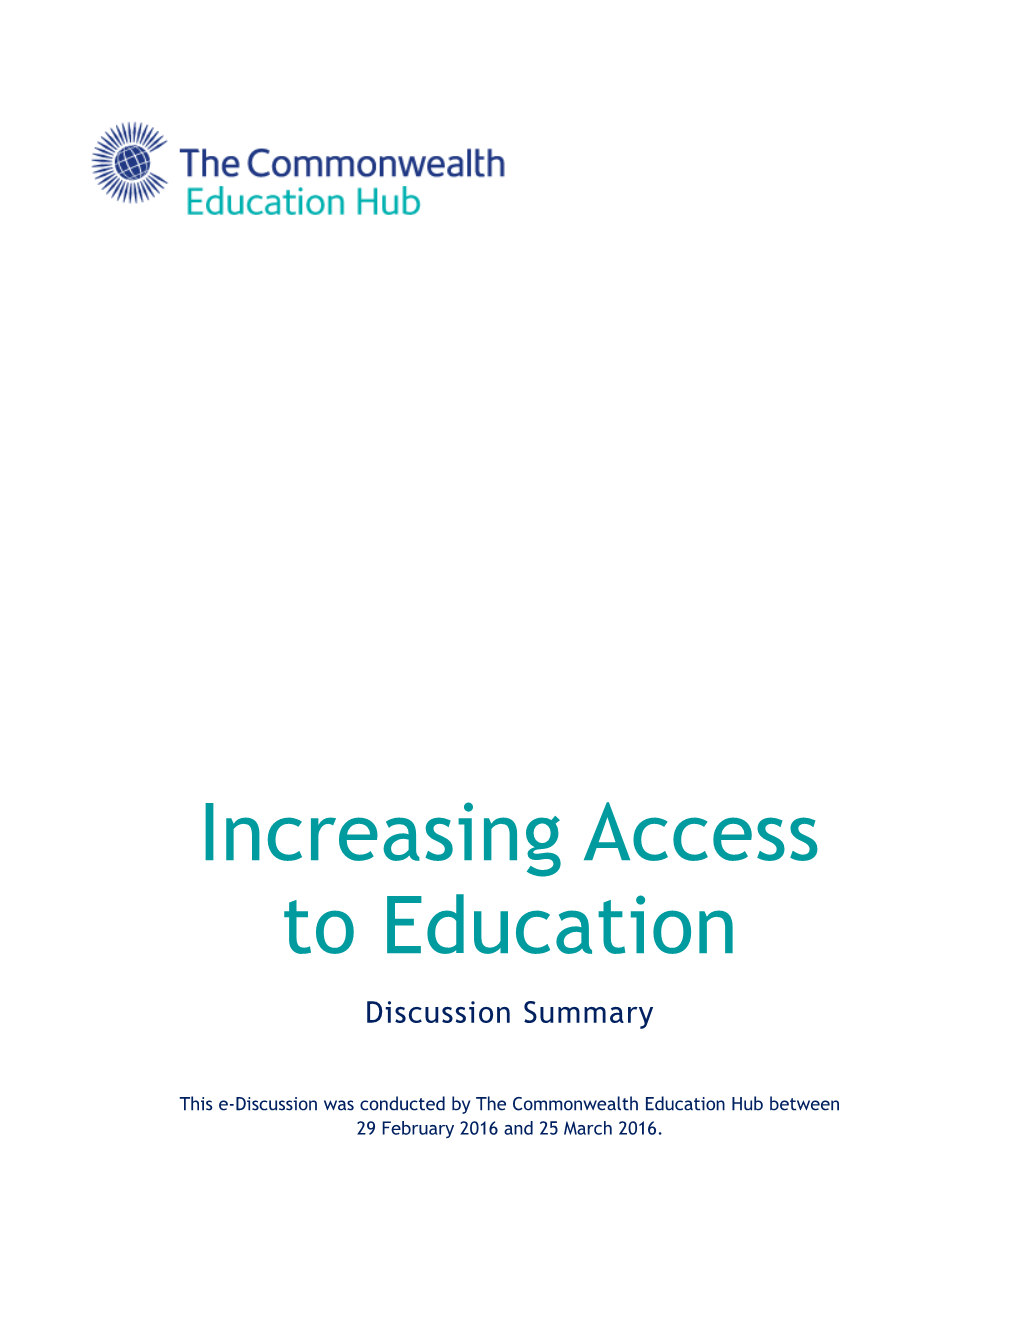 Increasing Access to Education Discussion Summary